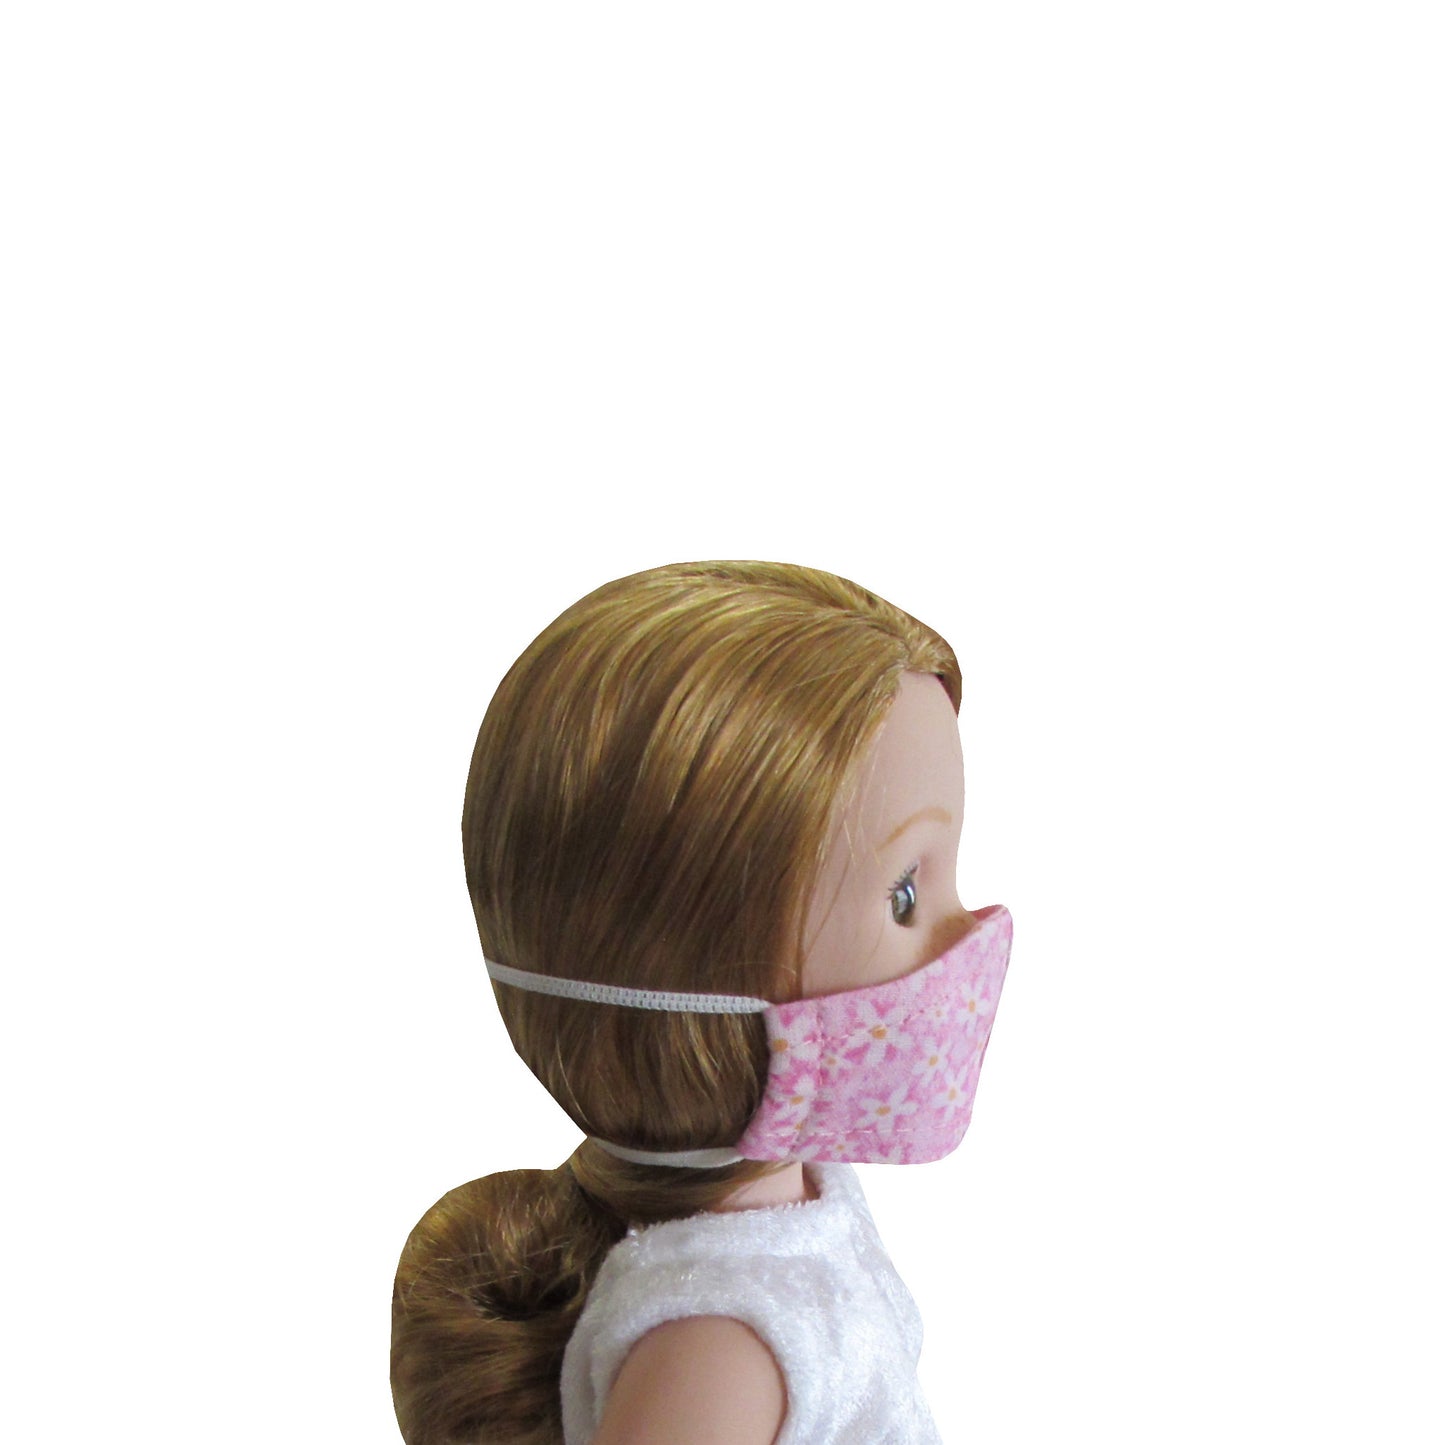 White Flowers on Pink Floral Print Doll Face Mask for 14 1/2-inch dolls with Wellie Wishers doll Side